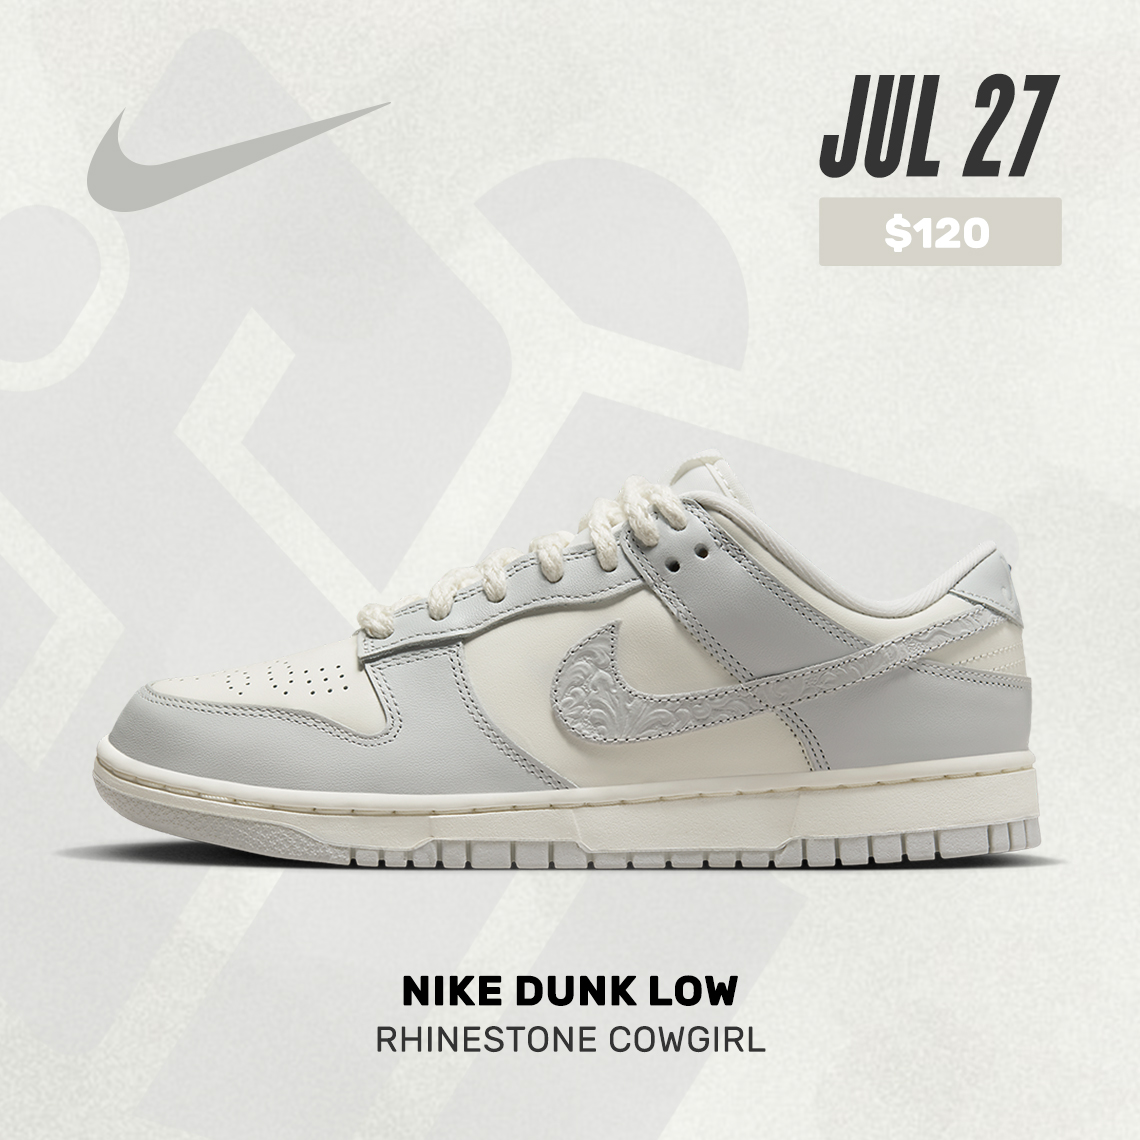 The Nike Dunk Low “Medium Olive” is finally set to restock on July 27th via  the Nike app! 🫒‼️ - Cop or Drop?